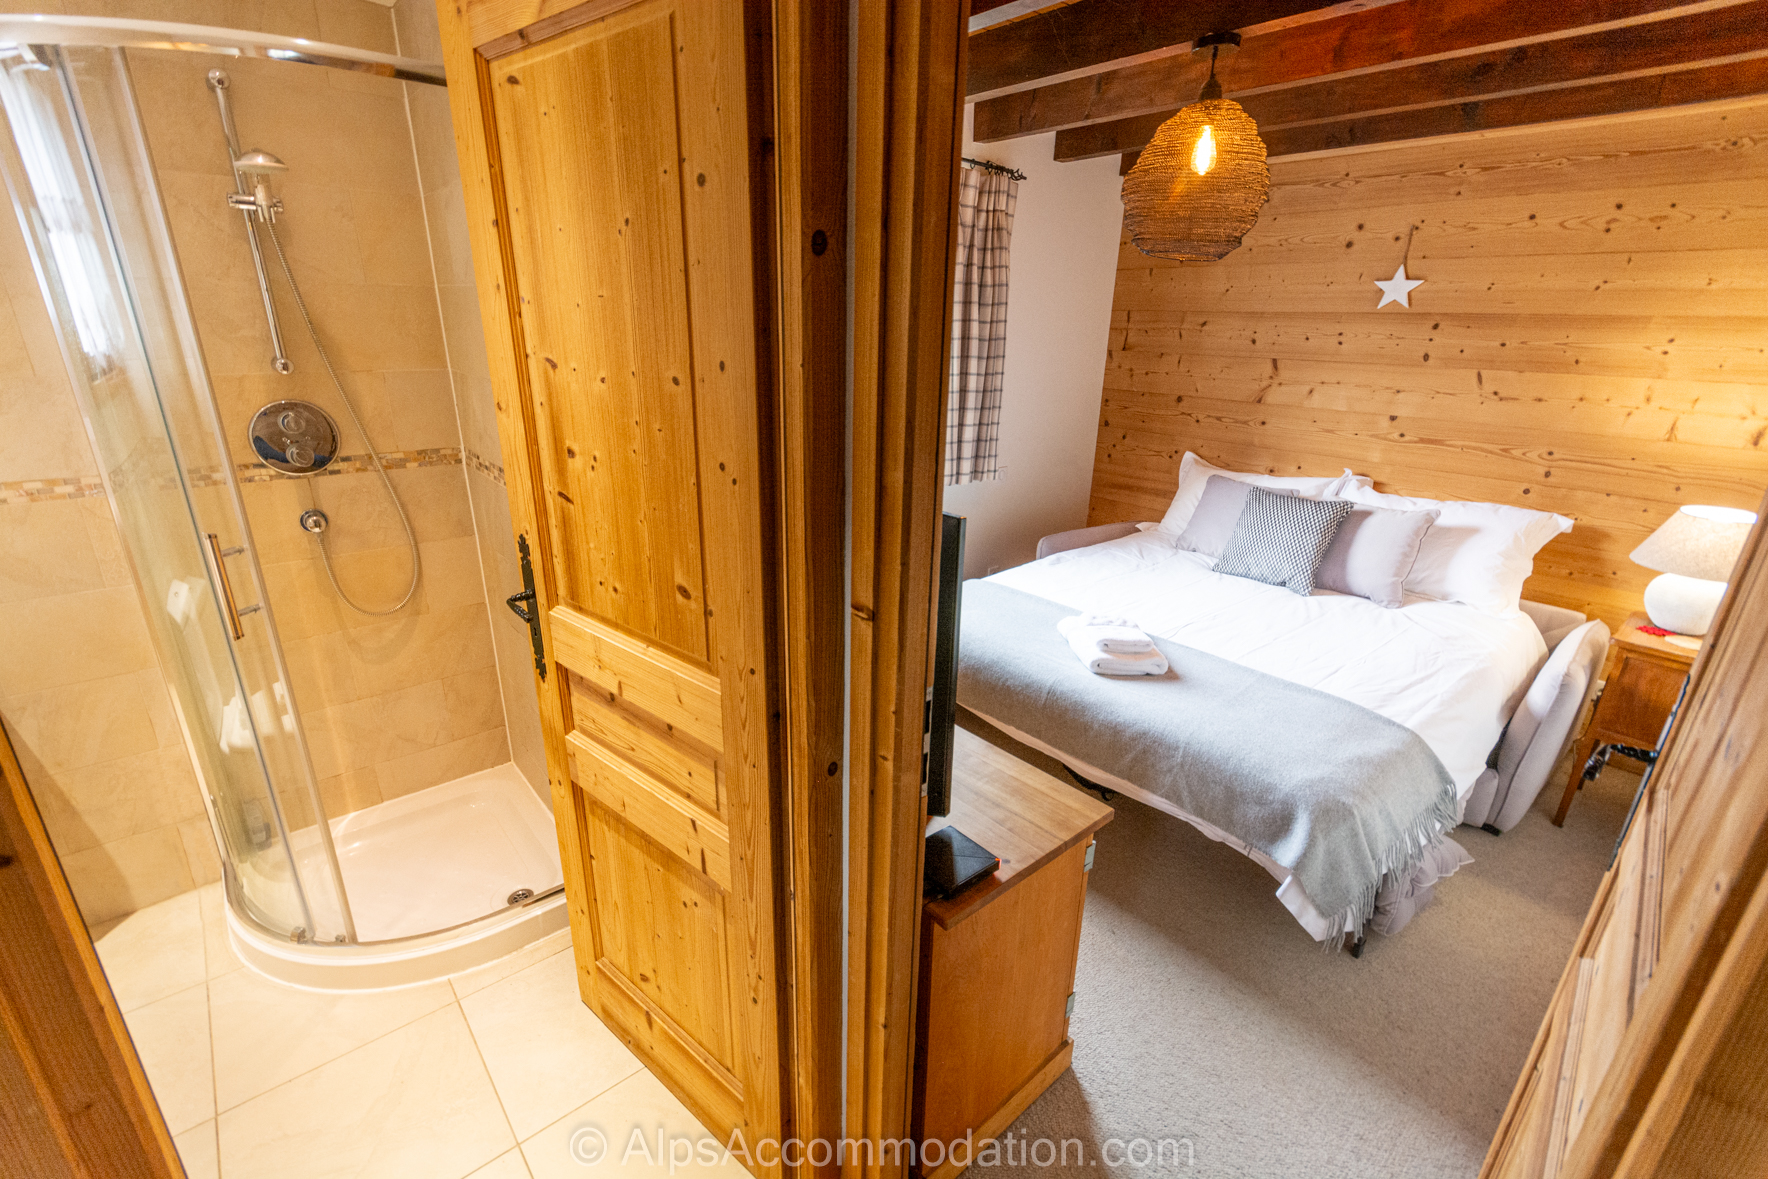 Chalet Etoile Morillon - Snug/bedroom 5 with quality king size sofa bed and adjacent family bathroom